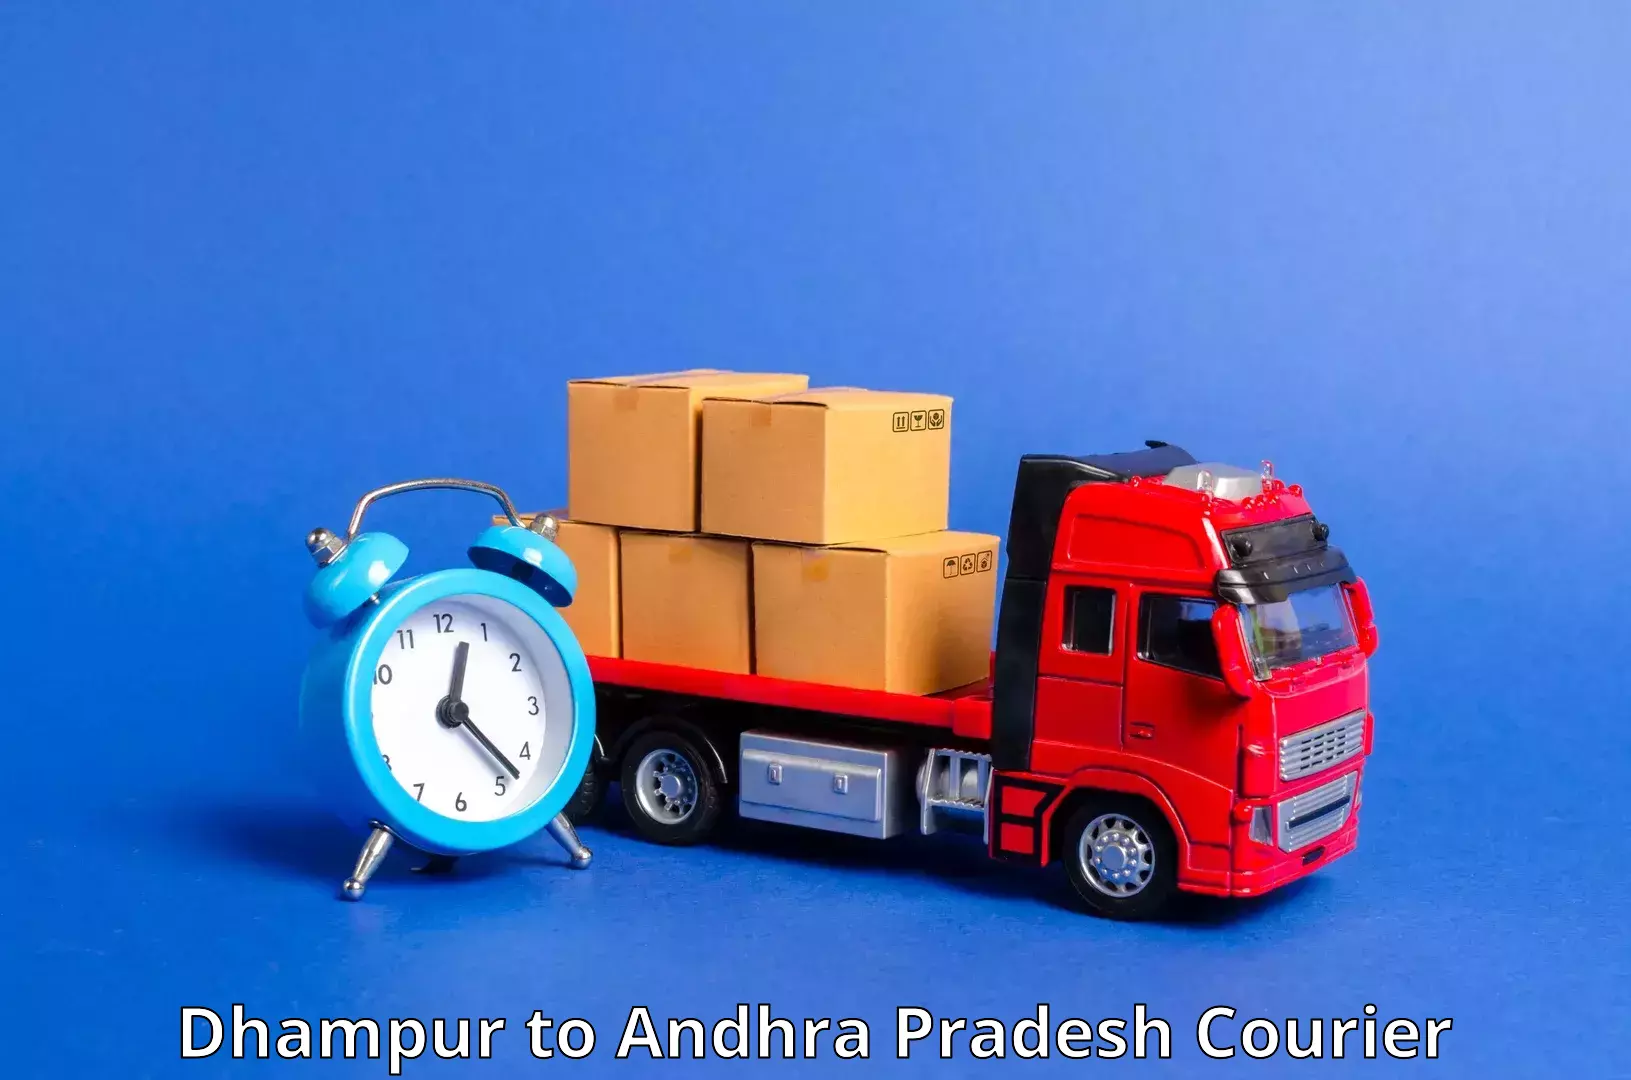 Round-the-clock parcel delivery in Dhampur to Anantapur